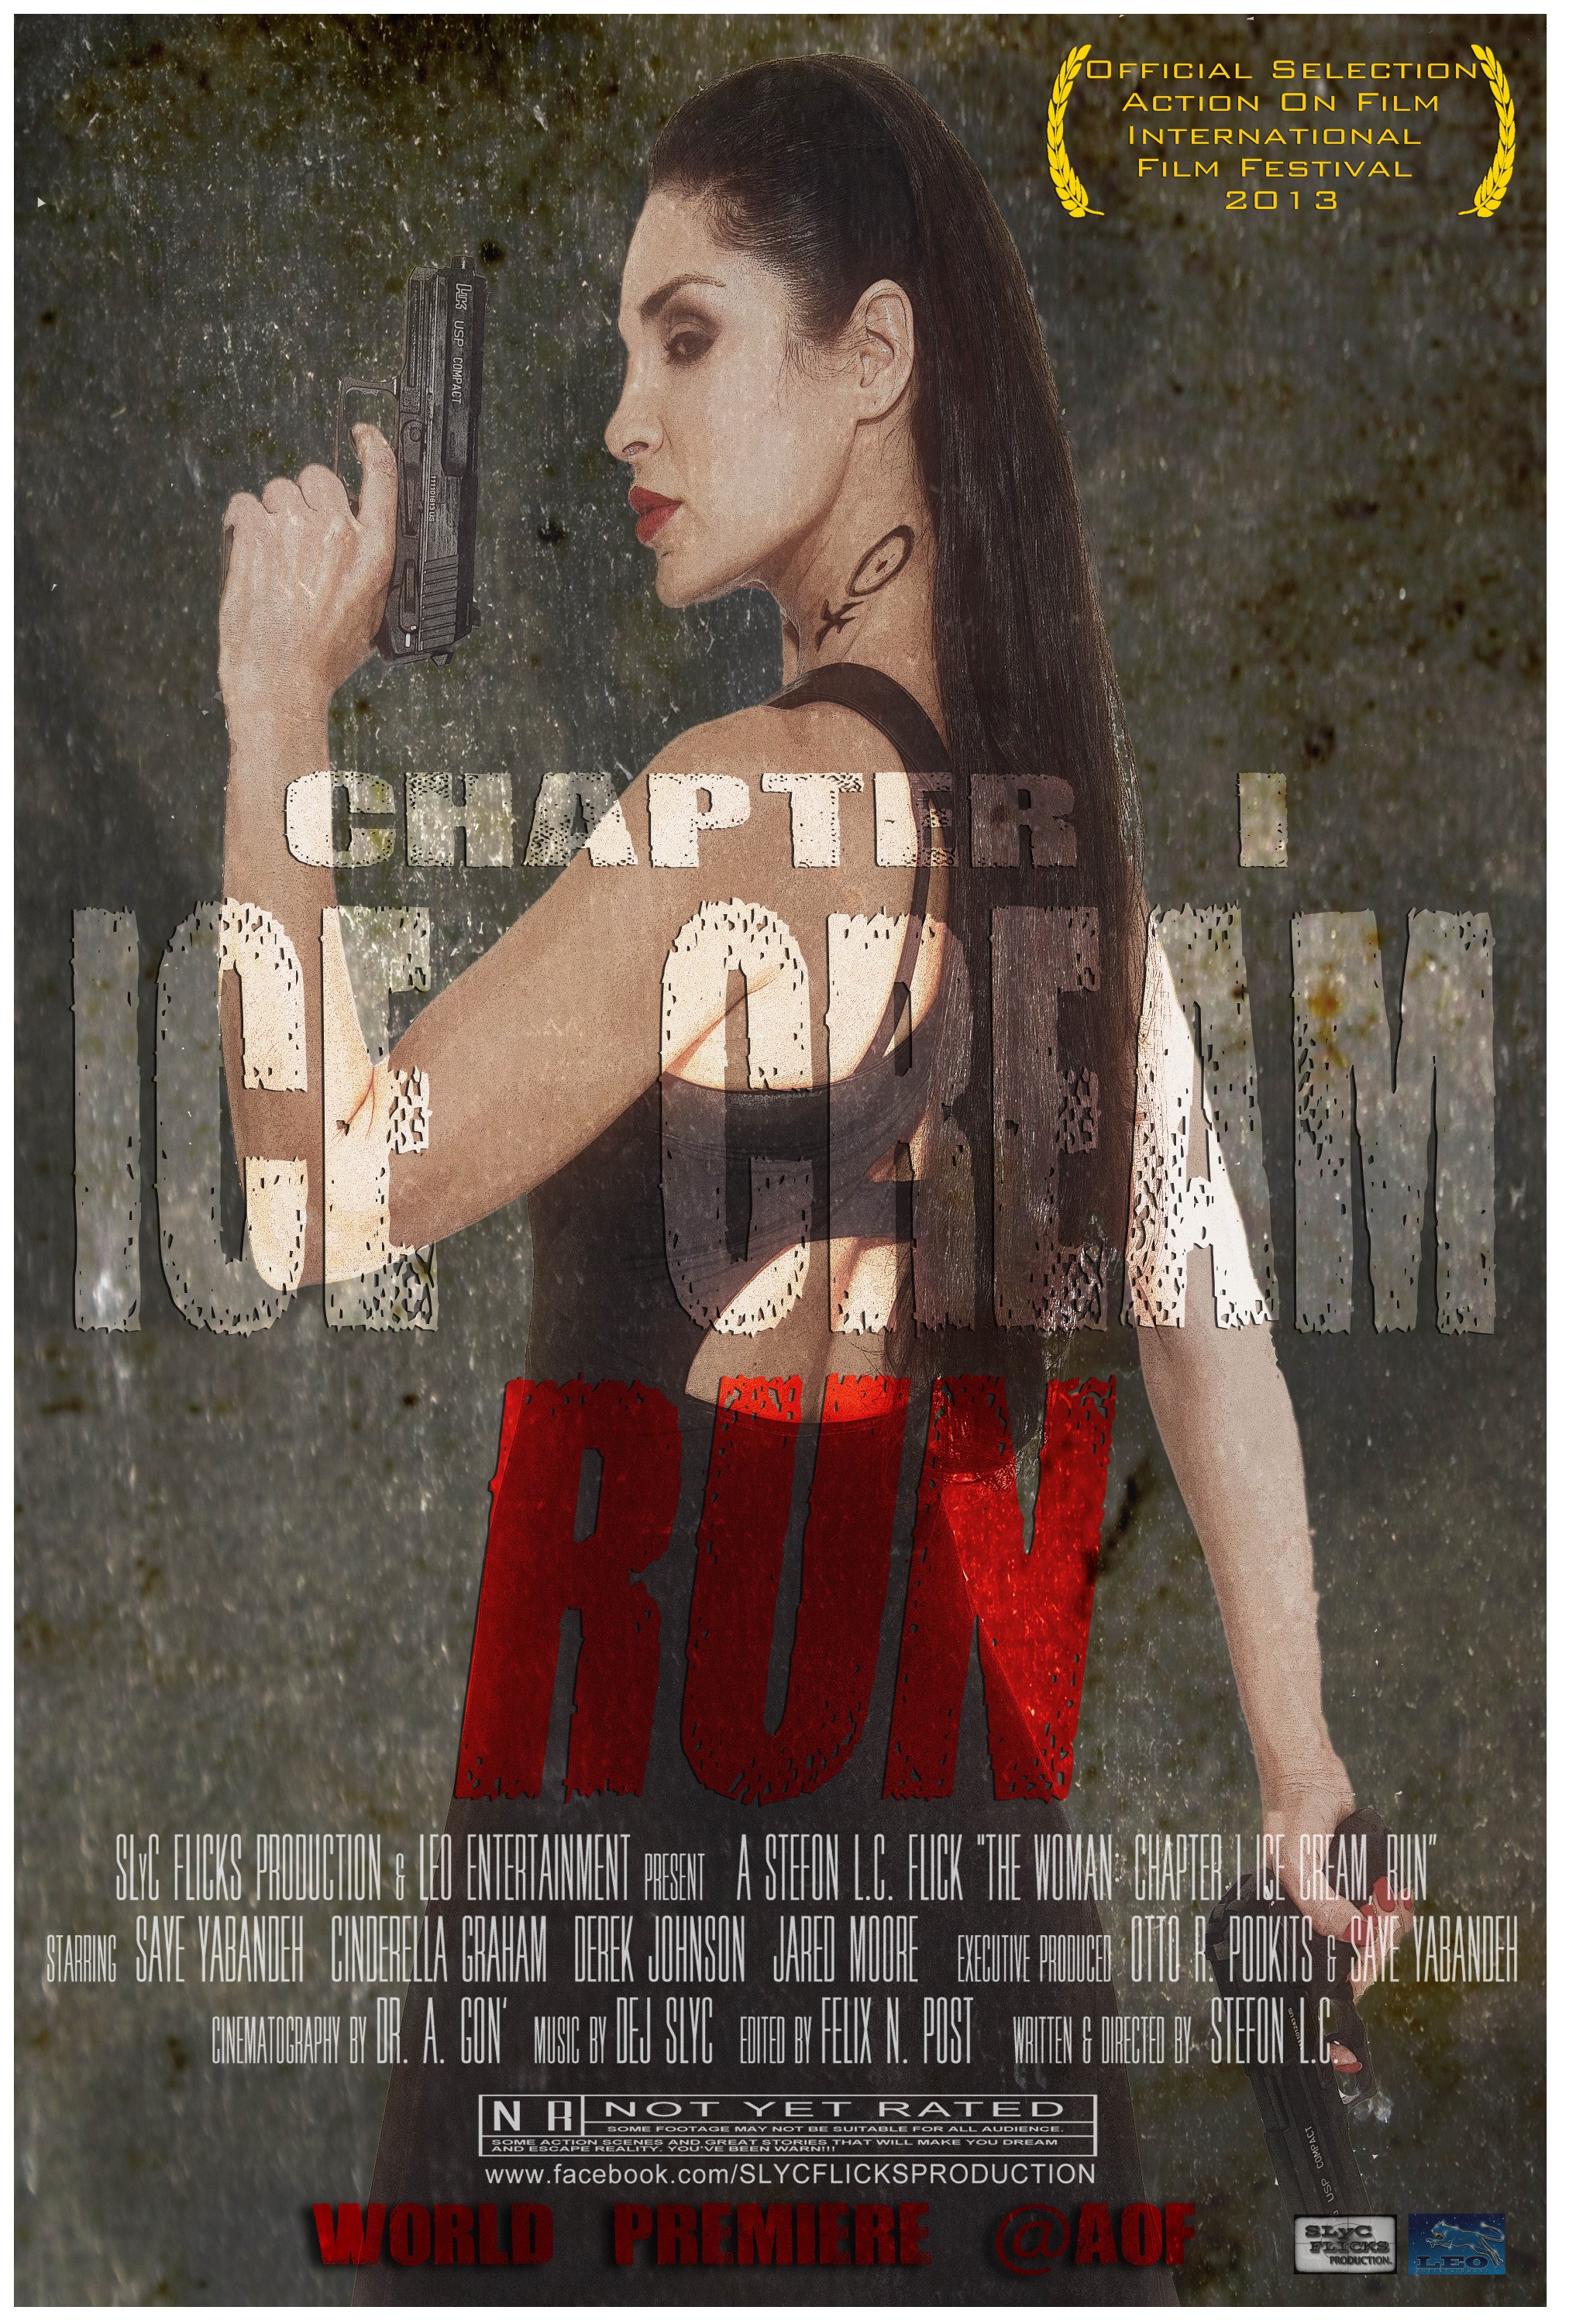 Mega Sized Movie Poster Image for The Woman: Chapter One - Ice Cream, Run